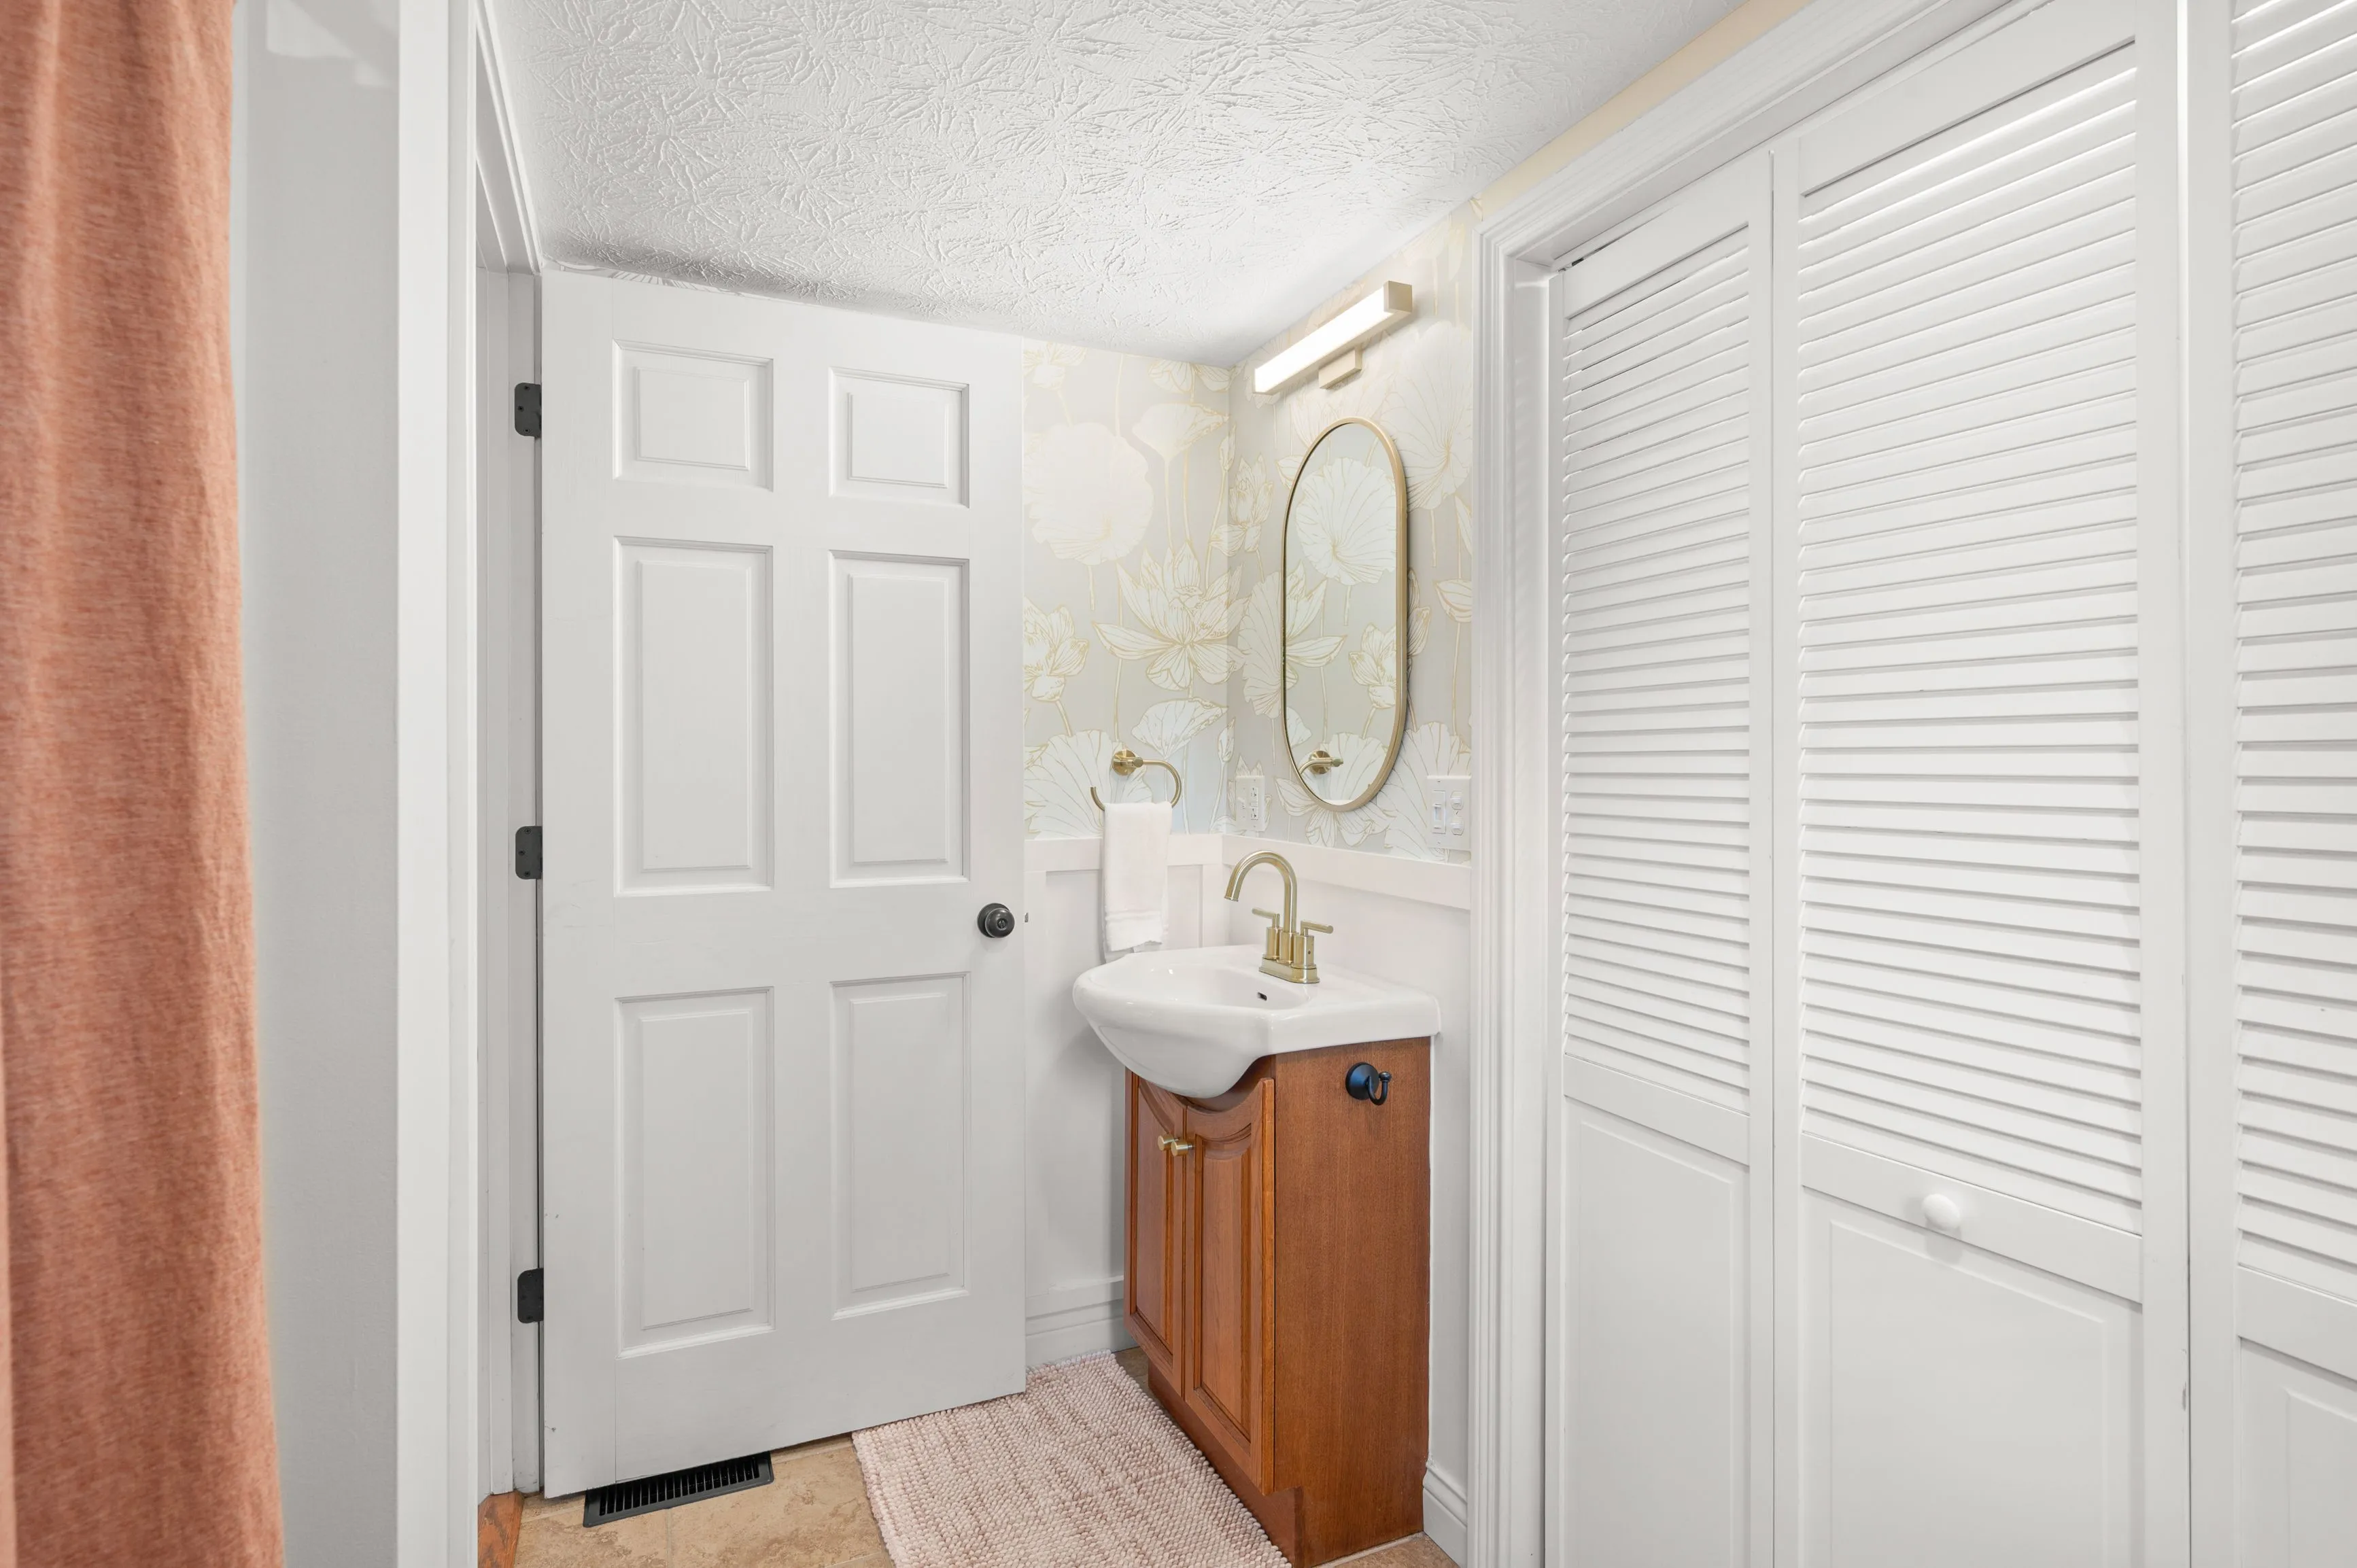 A small, narrow bathroom with white walls, a single vanity with wooden cabinets, a white sink, a mirror above the sink, and louvered doors on the right.